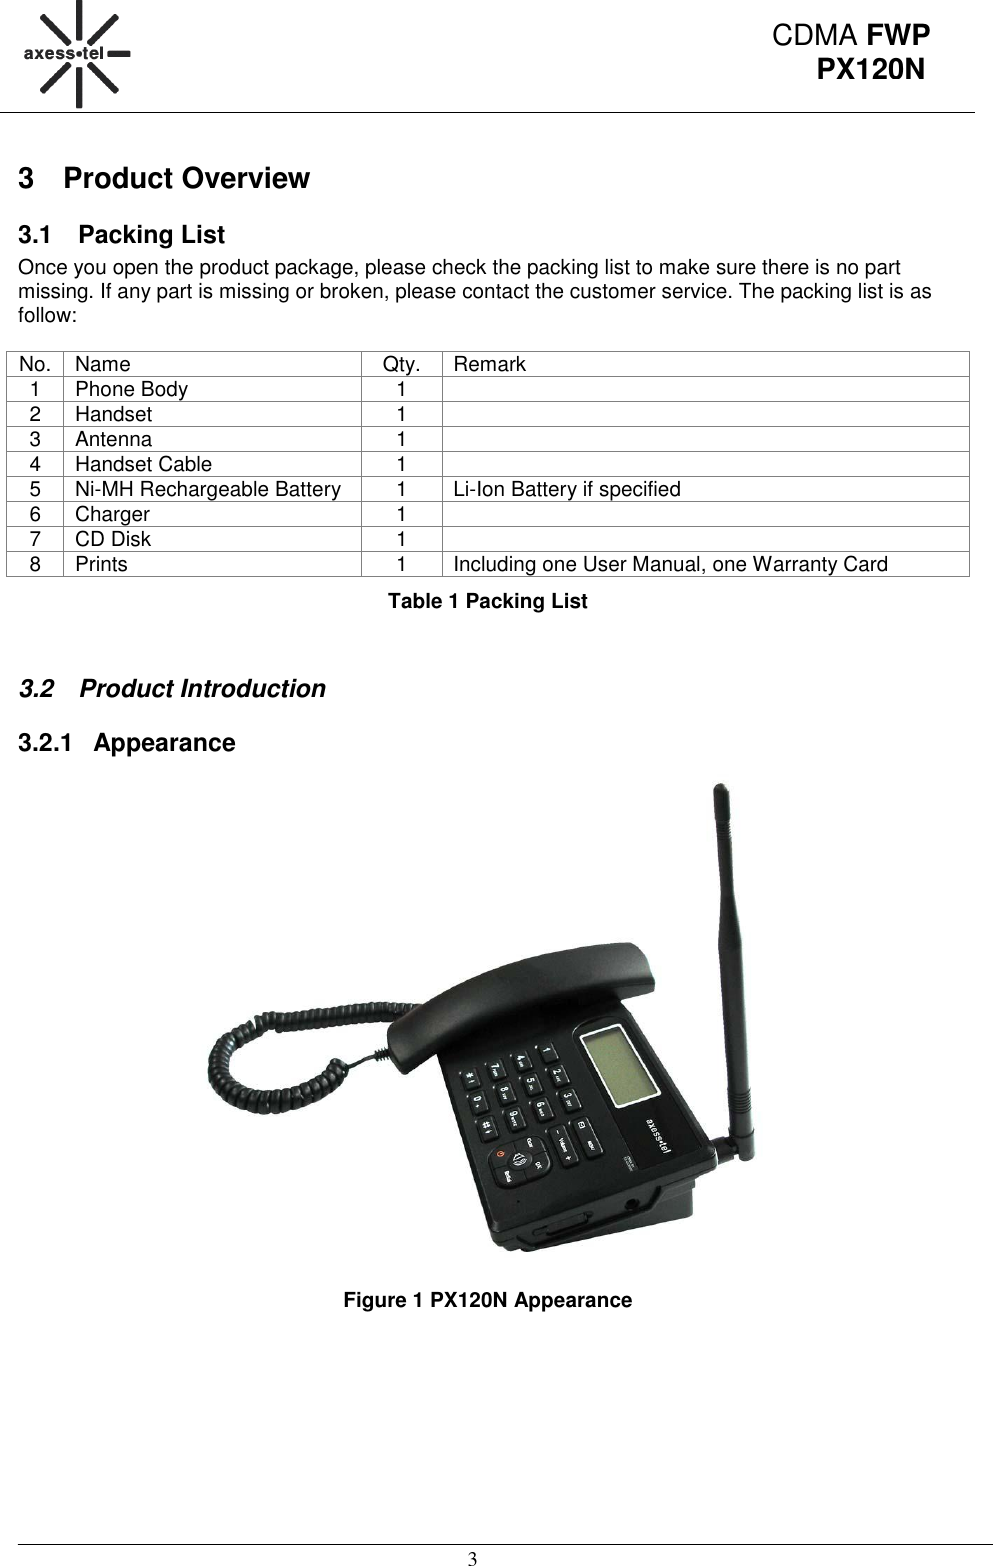                                                                                                      3 CDMA FWP PX120N 3  Product Overview 3.1  Packing List Once you open the product package, please check the packing list to make sure there is no part missing. If any part is missing or broken, please contact the customer service. The packing list is as follow:  No. Name Qty. Remark 1 Phone Body 1  2 Handset 1  3 Antenna 1  4 Handset Cable 1  5 Ni-MH Rechargeable Battery 1 Li-Ion Battery if specified 6 Charger 1  7 CD Disk 1  8 Prints 1 Including one User Manual, one Warranty Card Table 1 Packing List  3.2  Product Introduction 3.2.1  Appearance  Figure 1 PX120N Appearance 